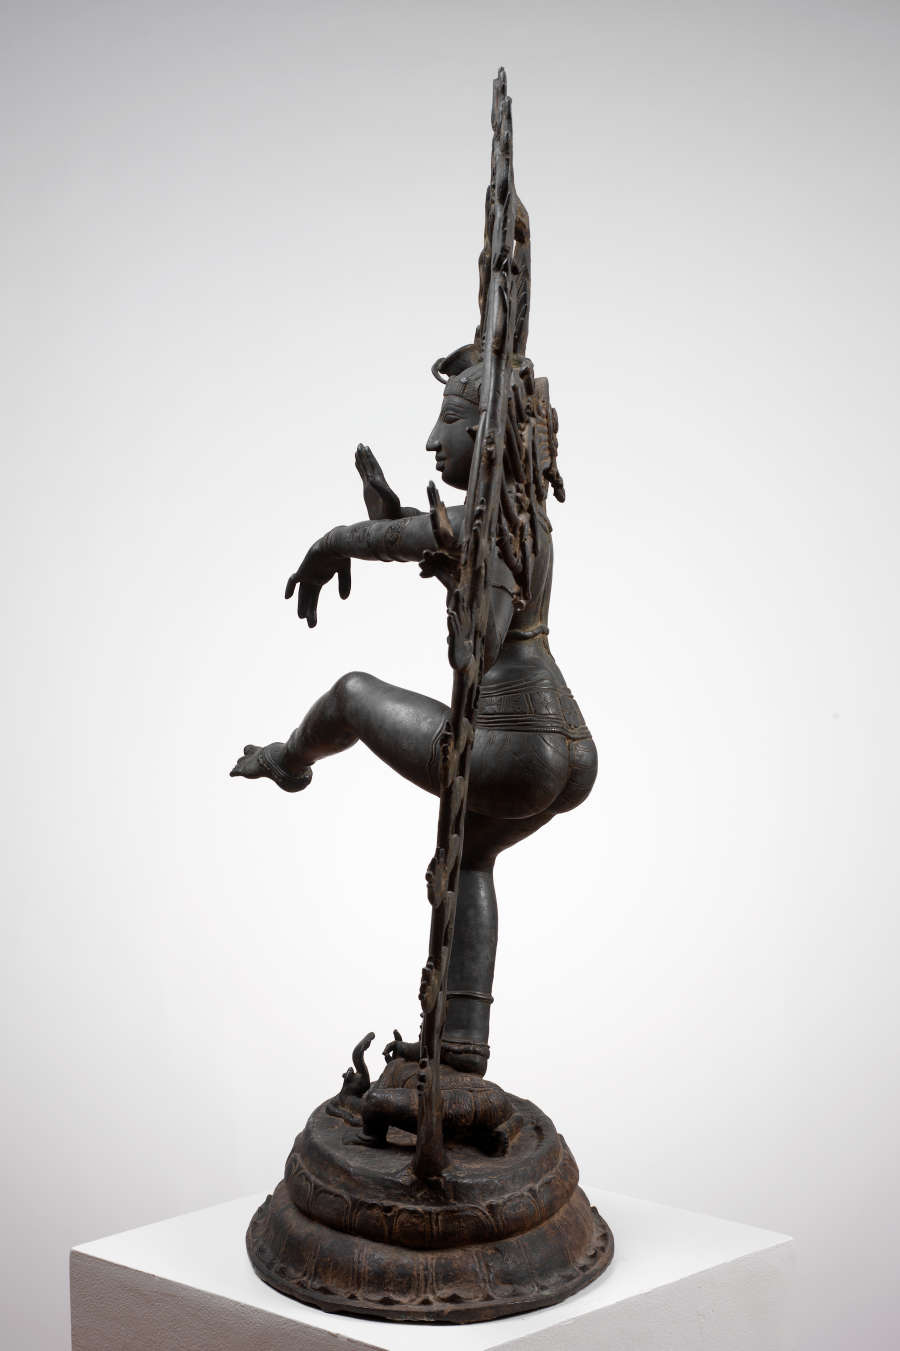 Side view of the bronze sculpture, showing the thin sculpted halo surrounding the figure and a truncated base. Two of the figure’s arms gesture outwards.